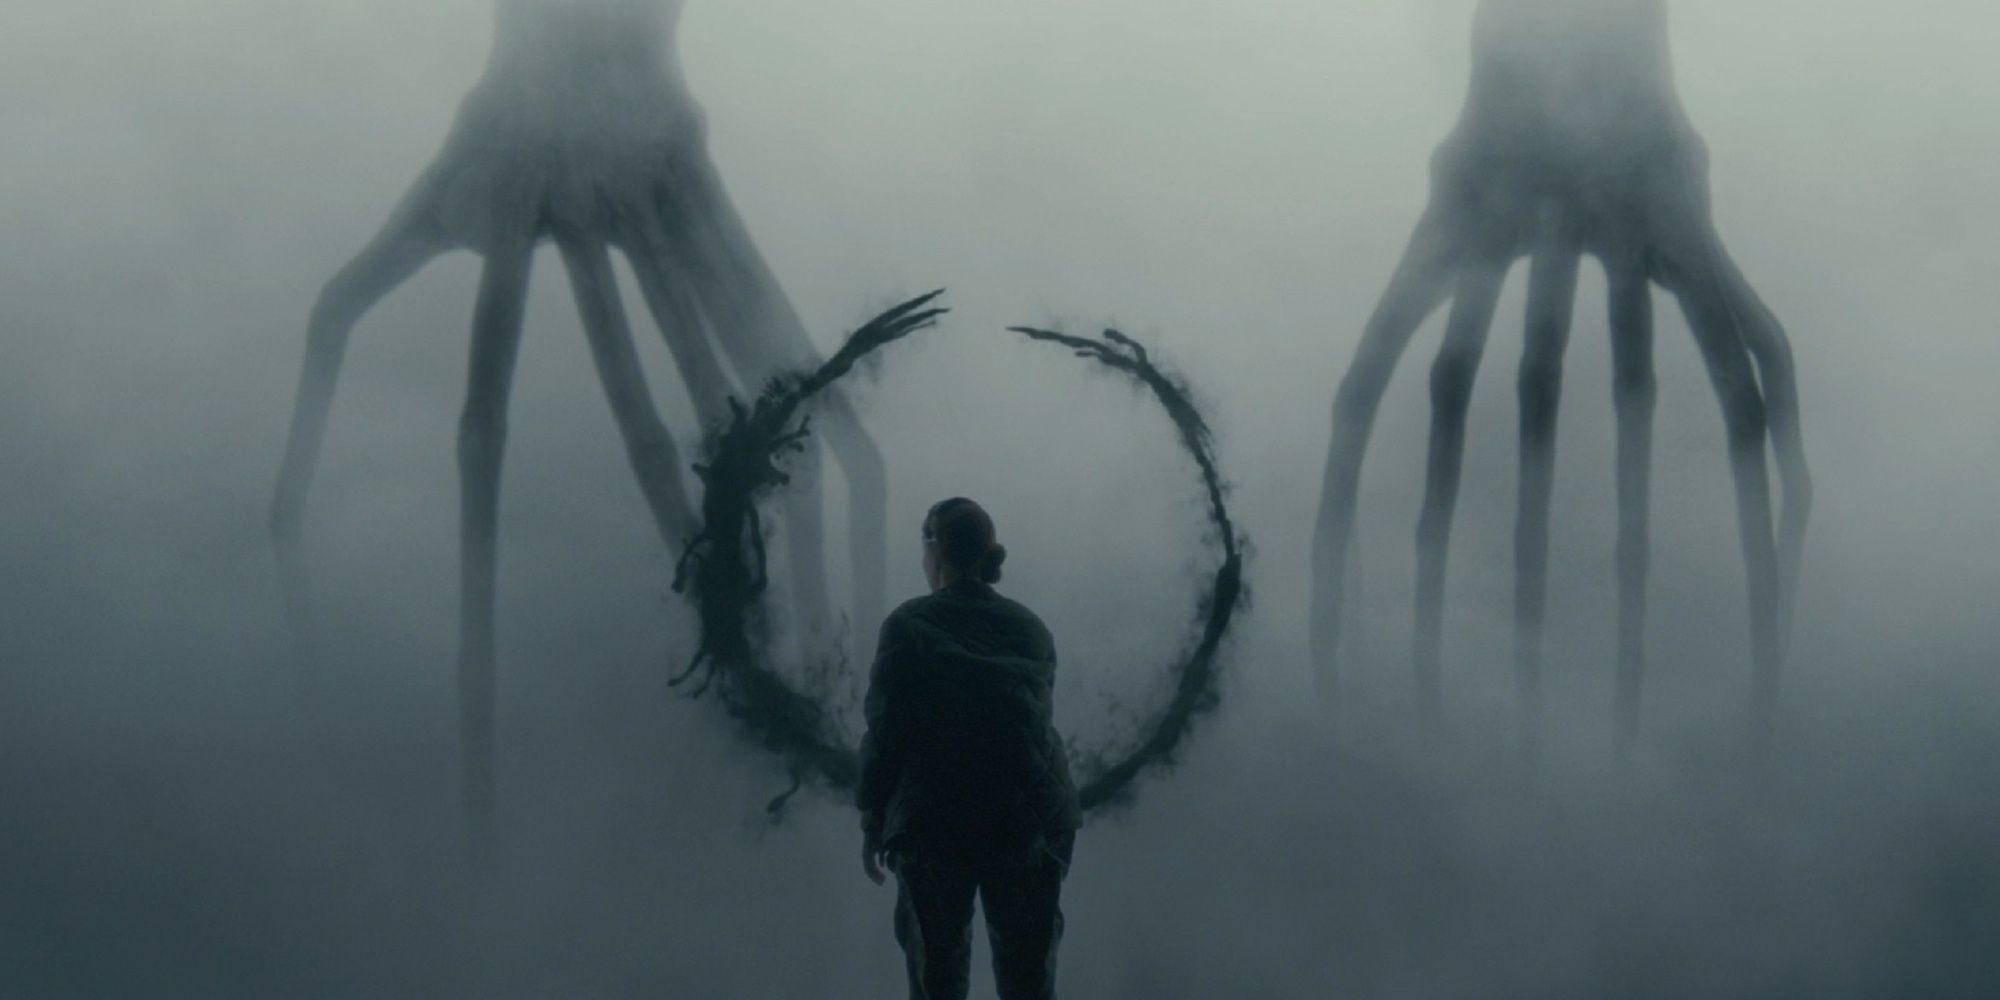 Dr. Louise Banks communicates with the aliens in Arrival.